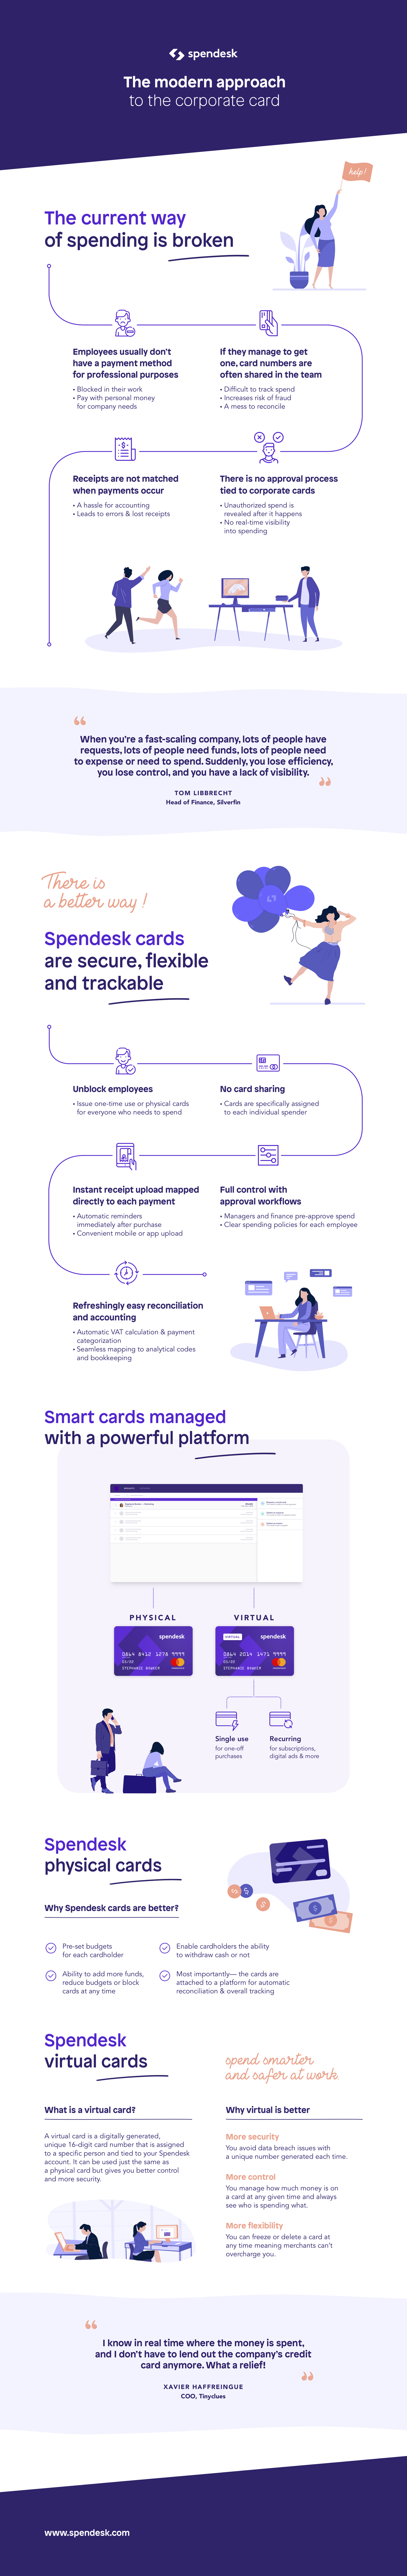 Spendesk Virtual Cards Infographic-2